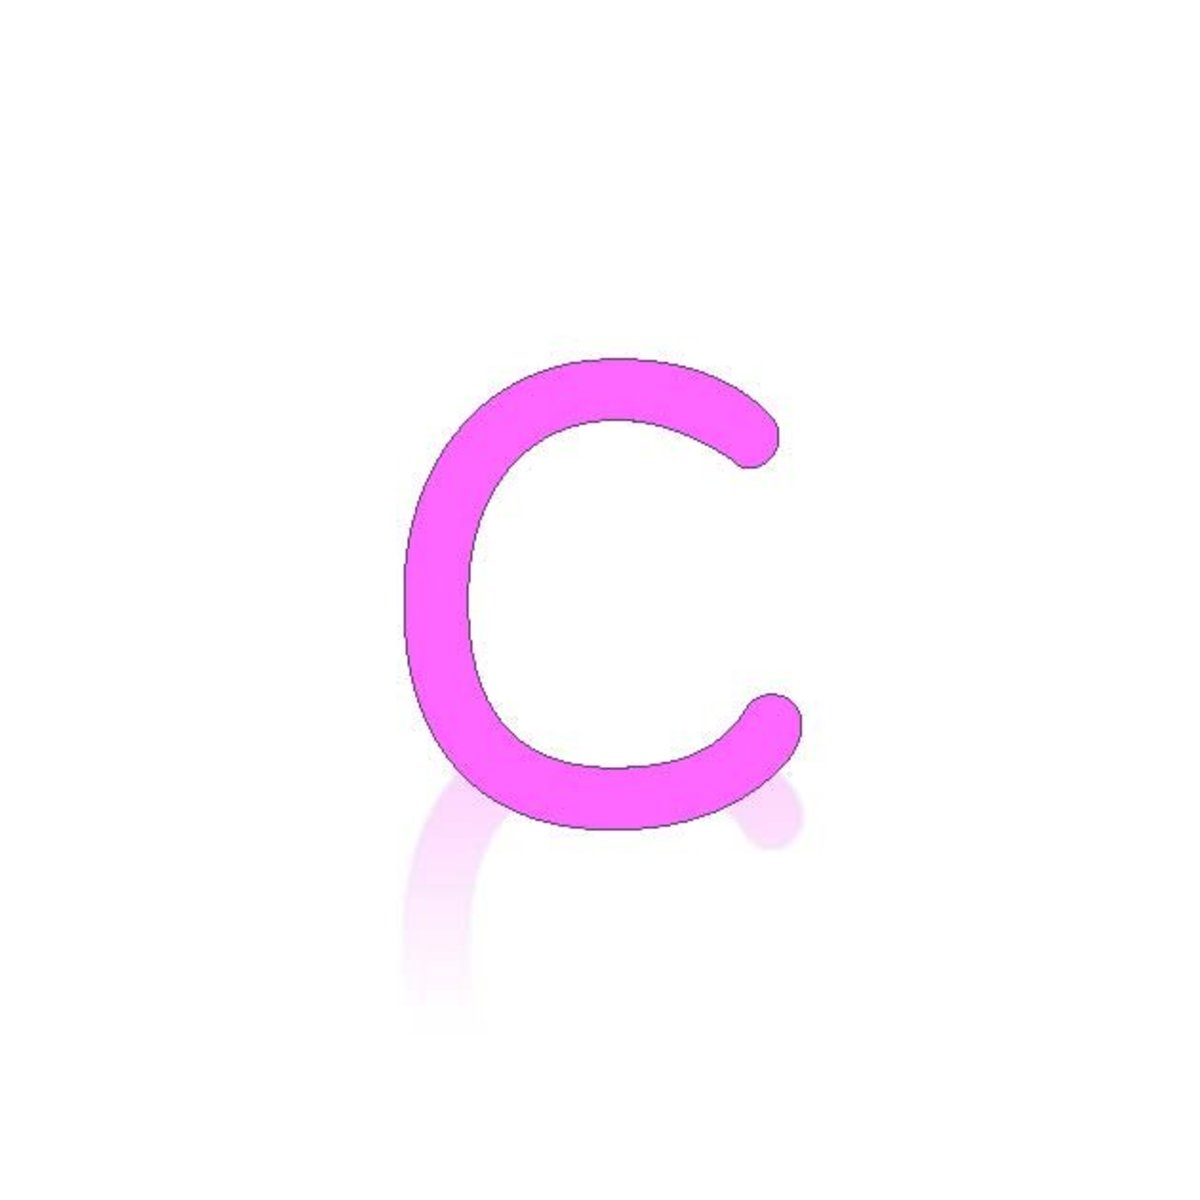 Acrostic Name Poems for Girls Names Starting with C